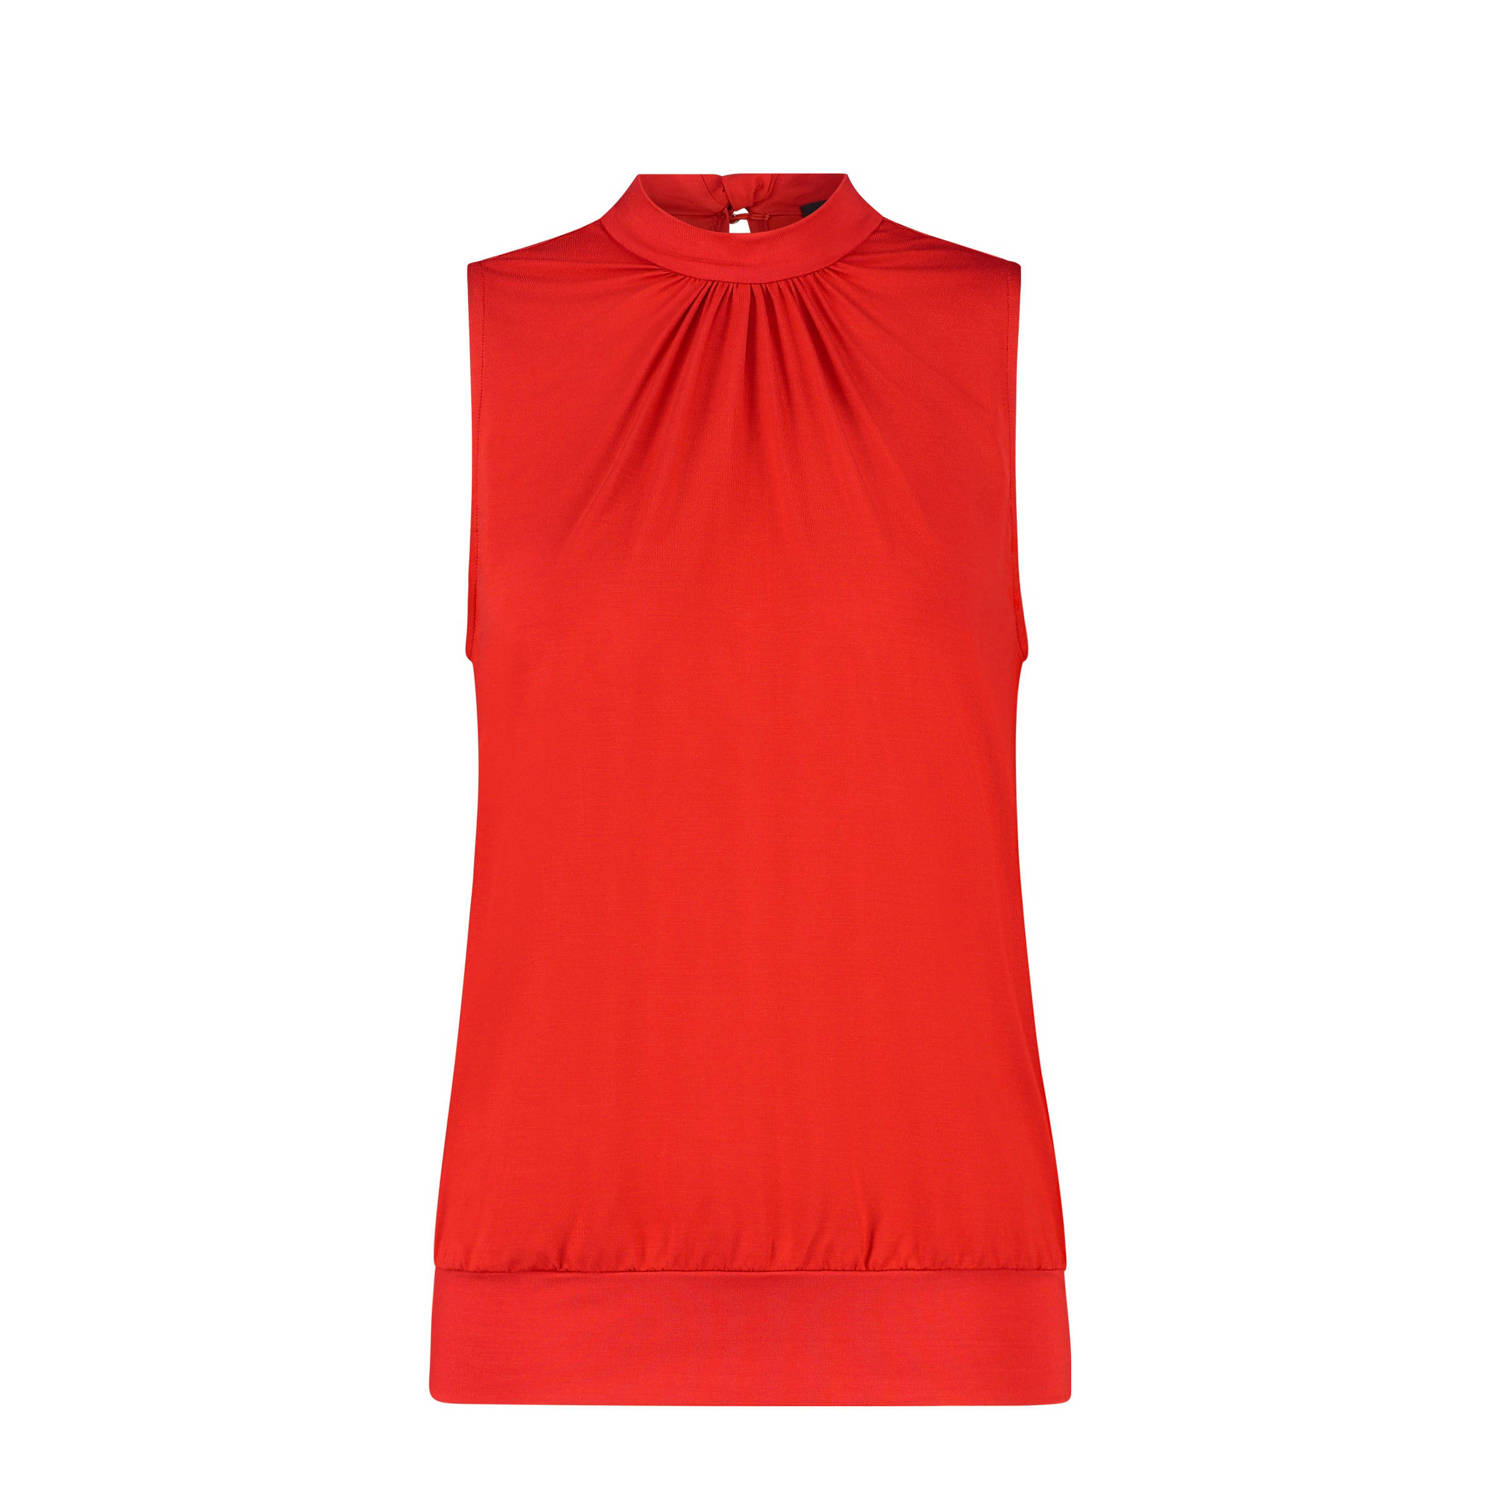 Expresso top EX24-13083 rood